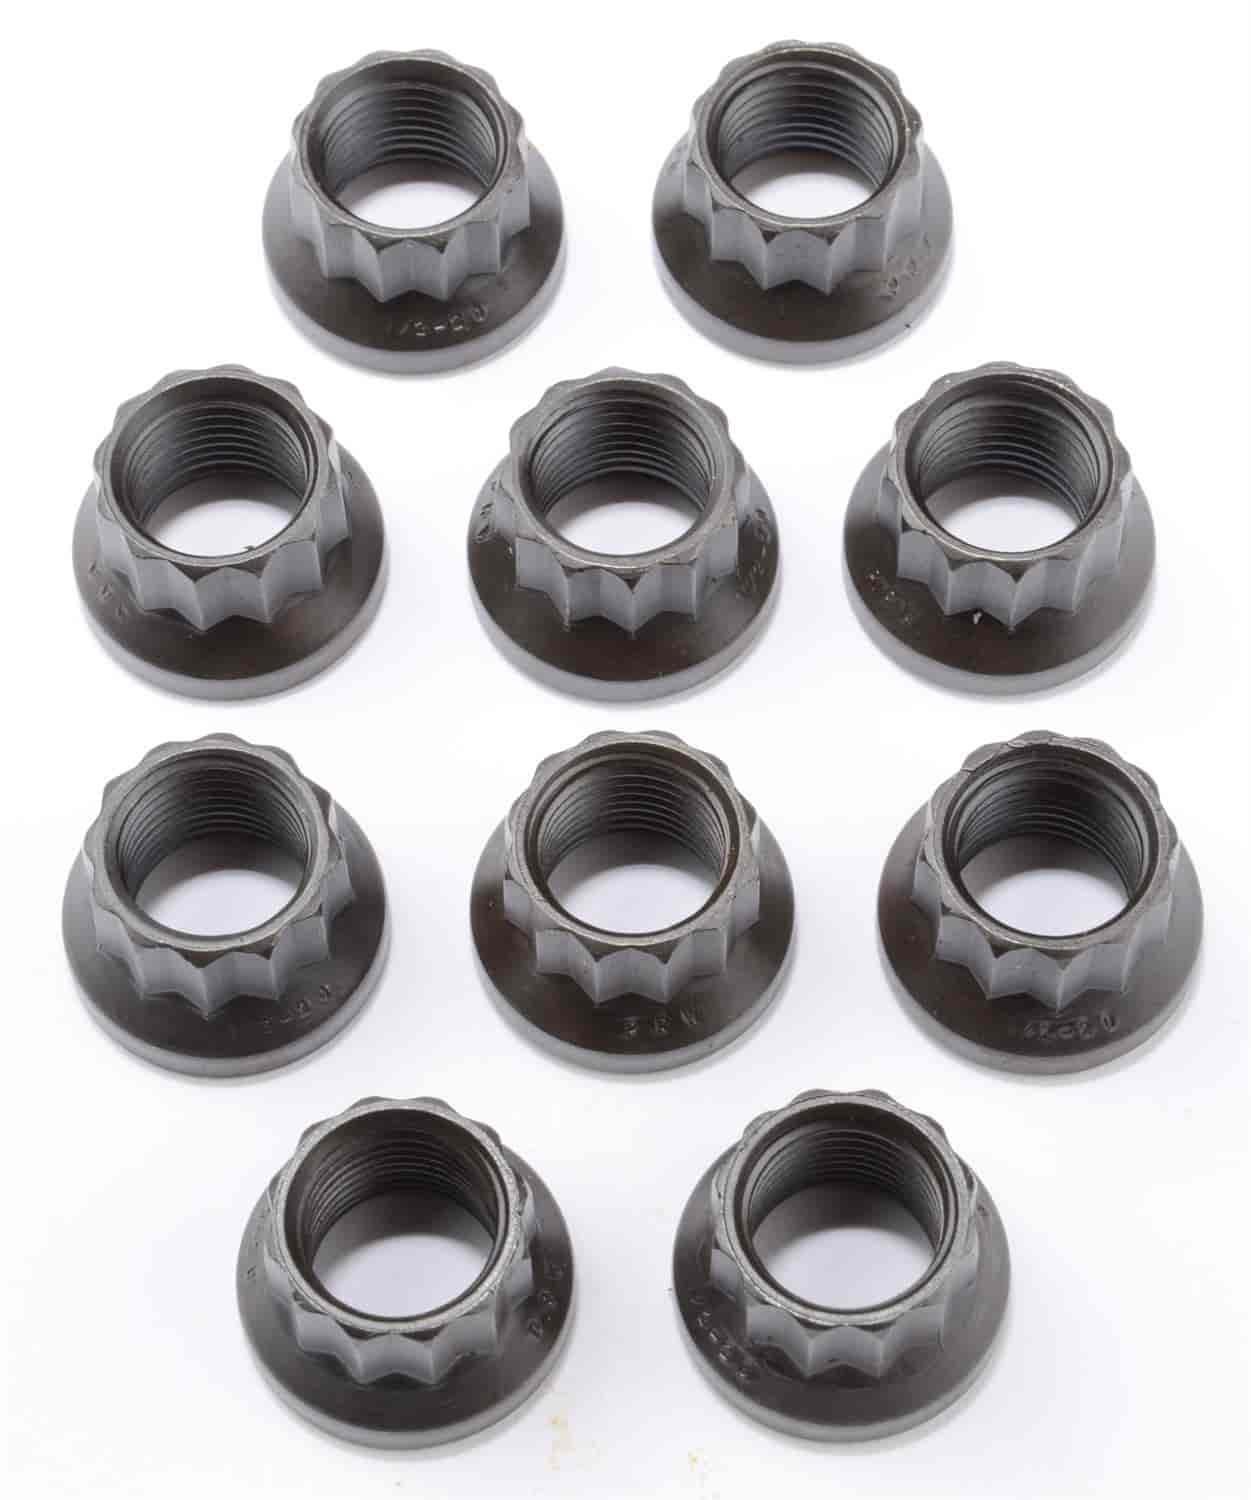 12-Point Flange Nuts 1/2"-20